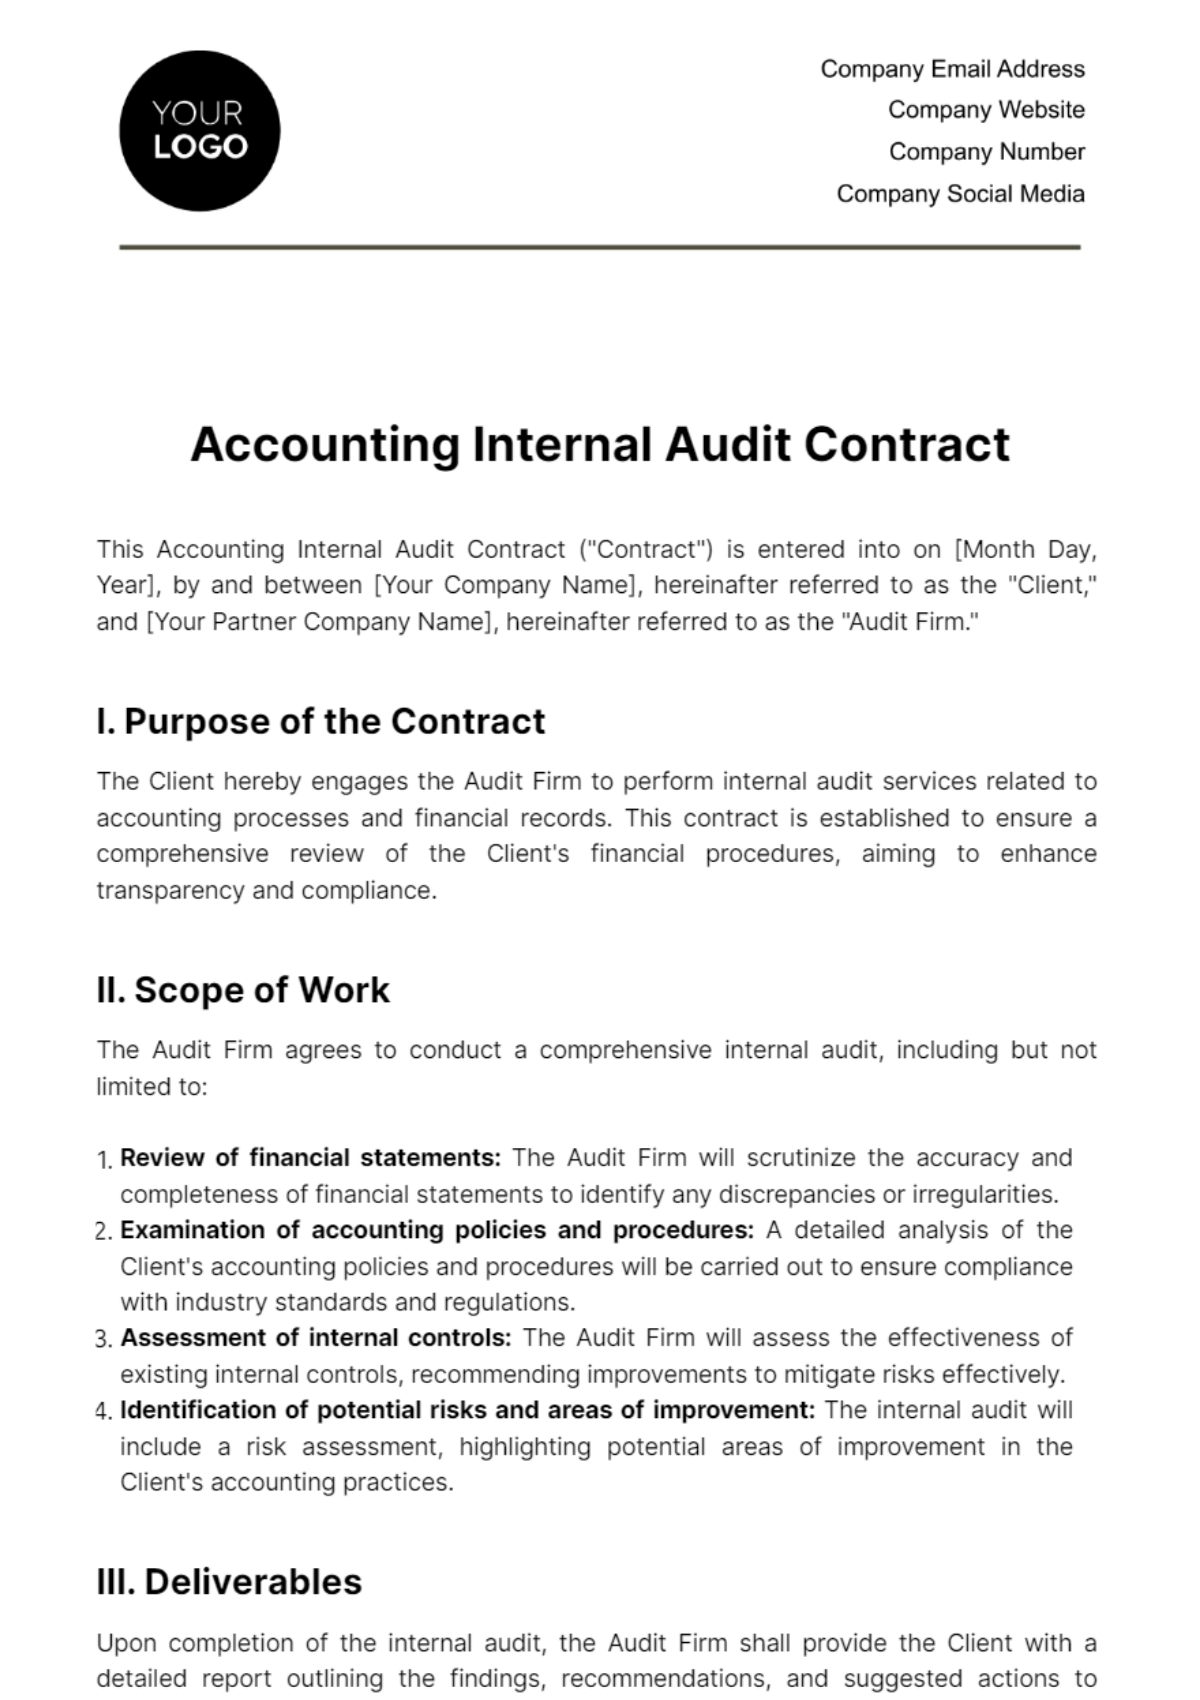 Accounting Internal Audit Contract Template